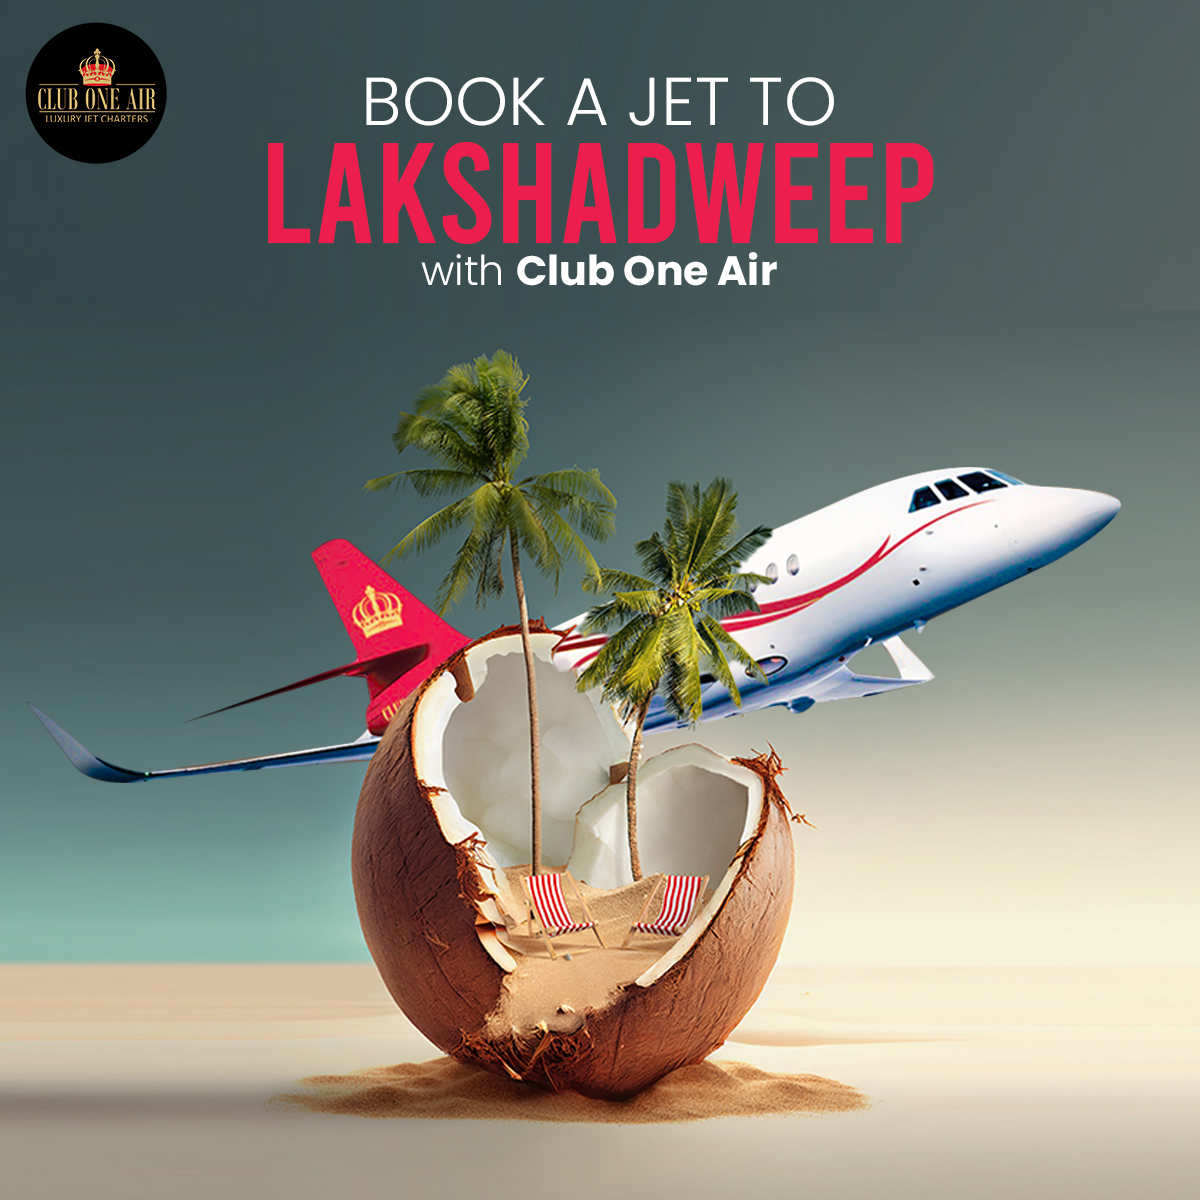 Want to experience the untouched beauty of #Lakshadweep Islands? Embark on an immersive journey with #ClubOneAir and experience it all. To know more about Lakshadweep Island, read at bit.ly/48GG8bA

#CharterPlanes #Aviation #Travel #PrivateJet